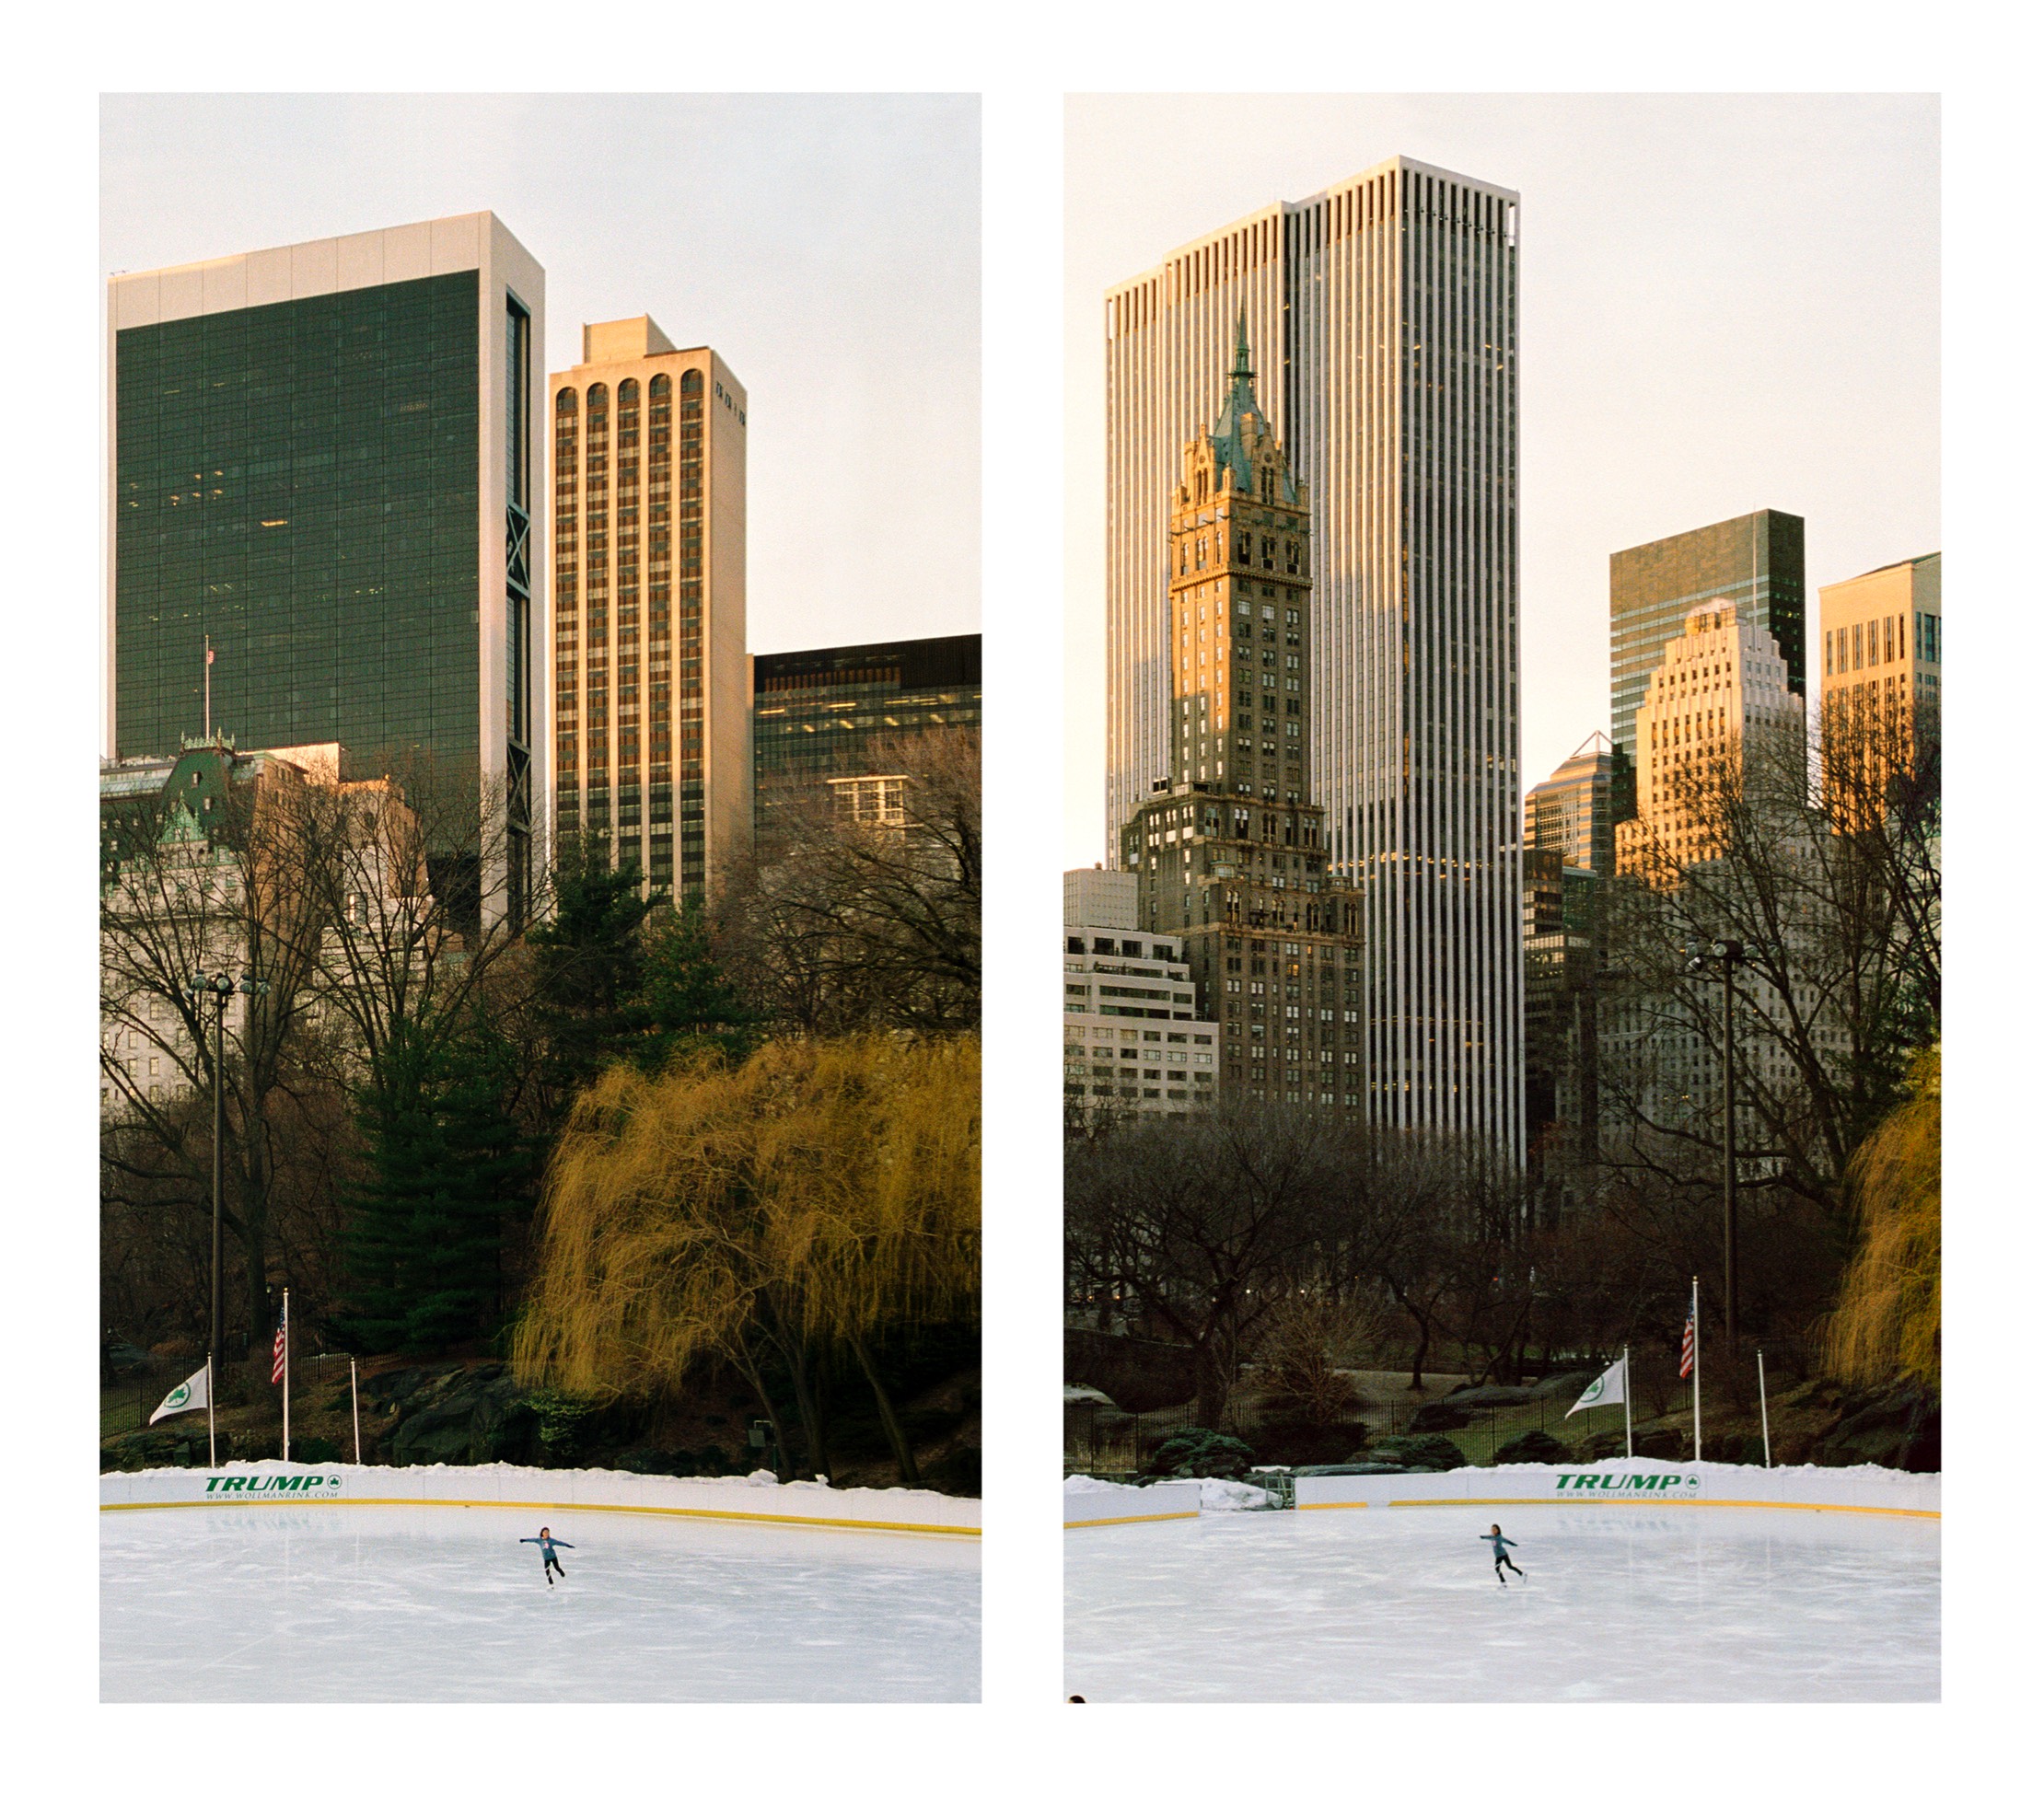 Exposure #86: N.Y.C., Central Park, Wollman Skating Rink, 03.01.11, 6:36 a.m., 2011